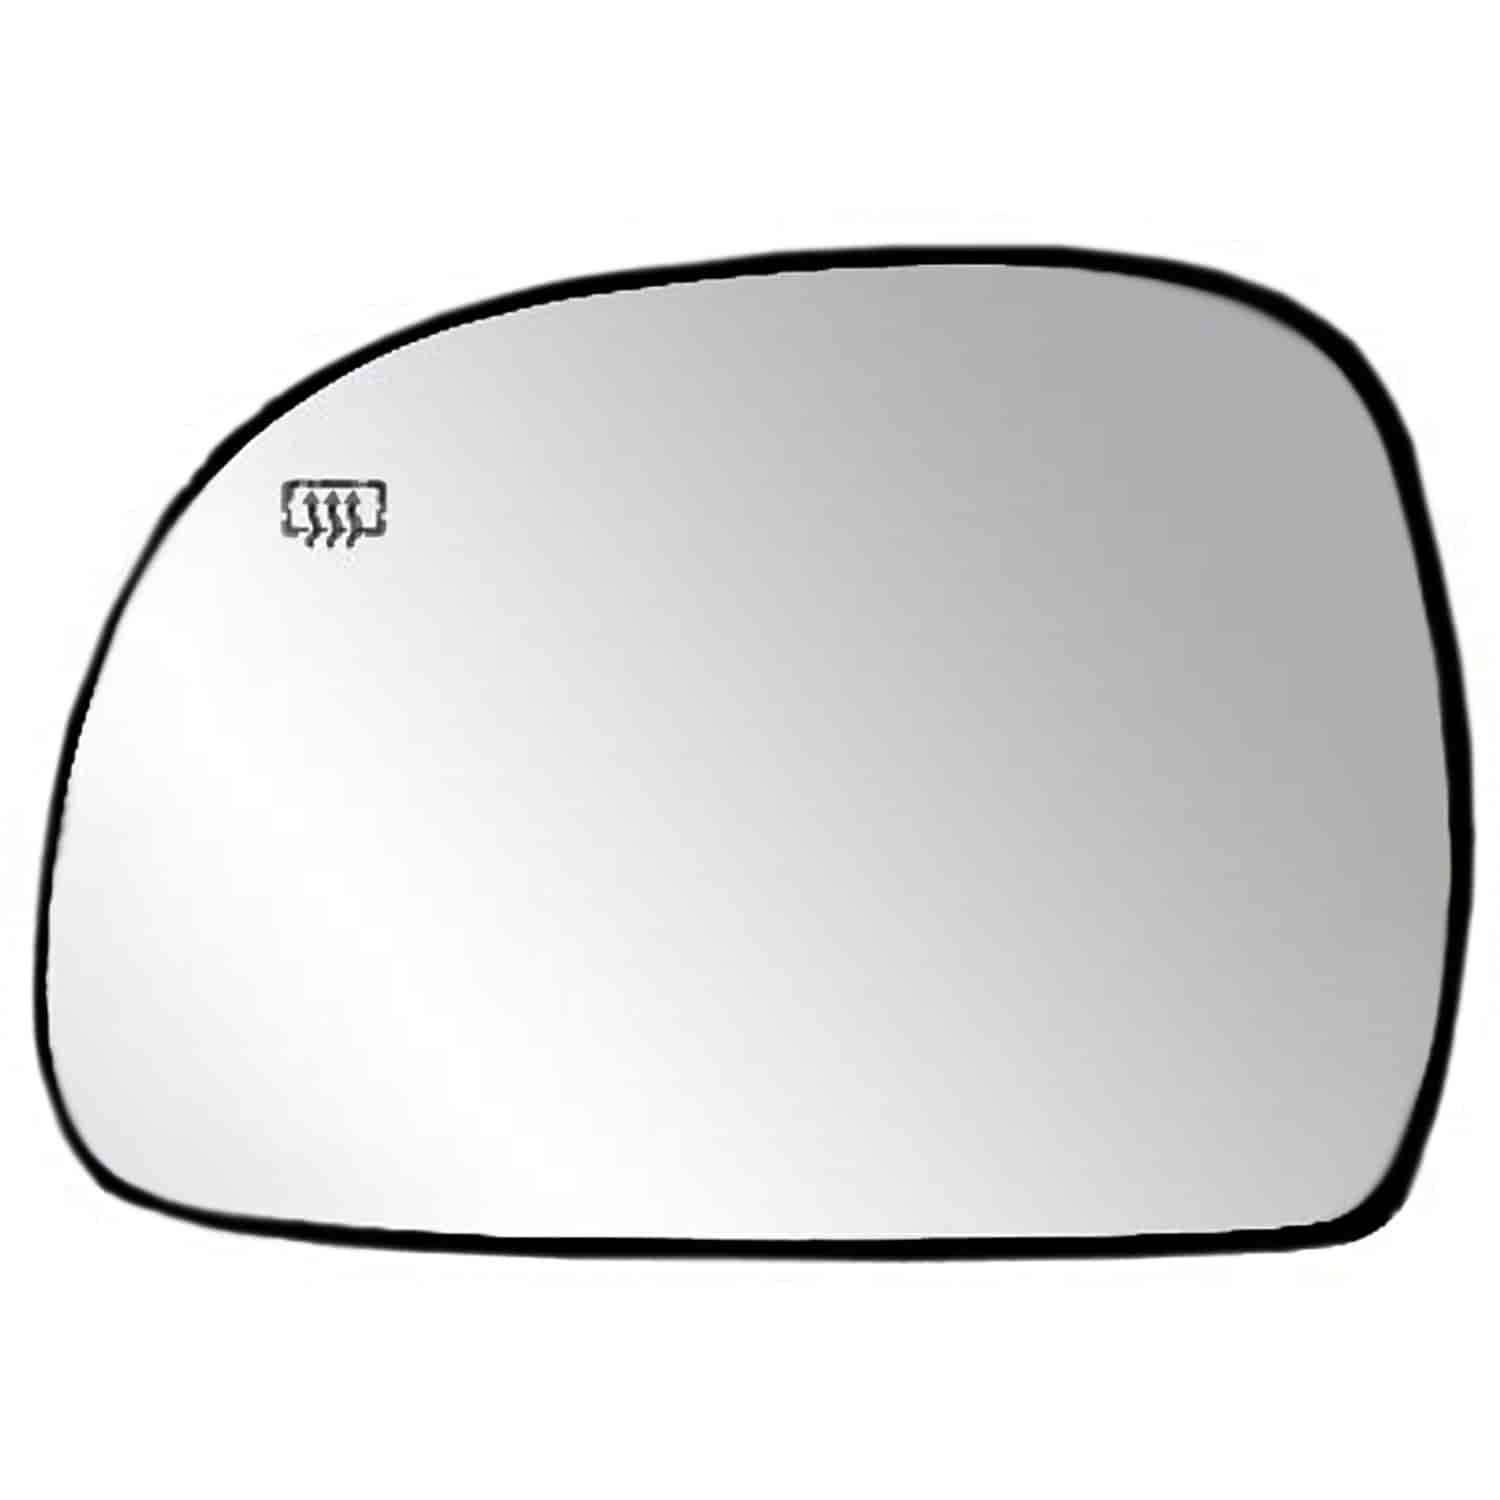 Heated Replacement Glass Assembly for 95-98 Blazer Mid Size; 94-98 S10 Pick-Up ; 98 Envoy Mid Size ;